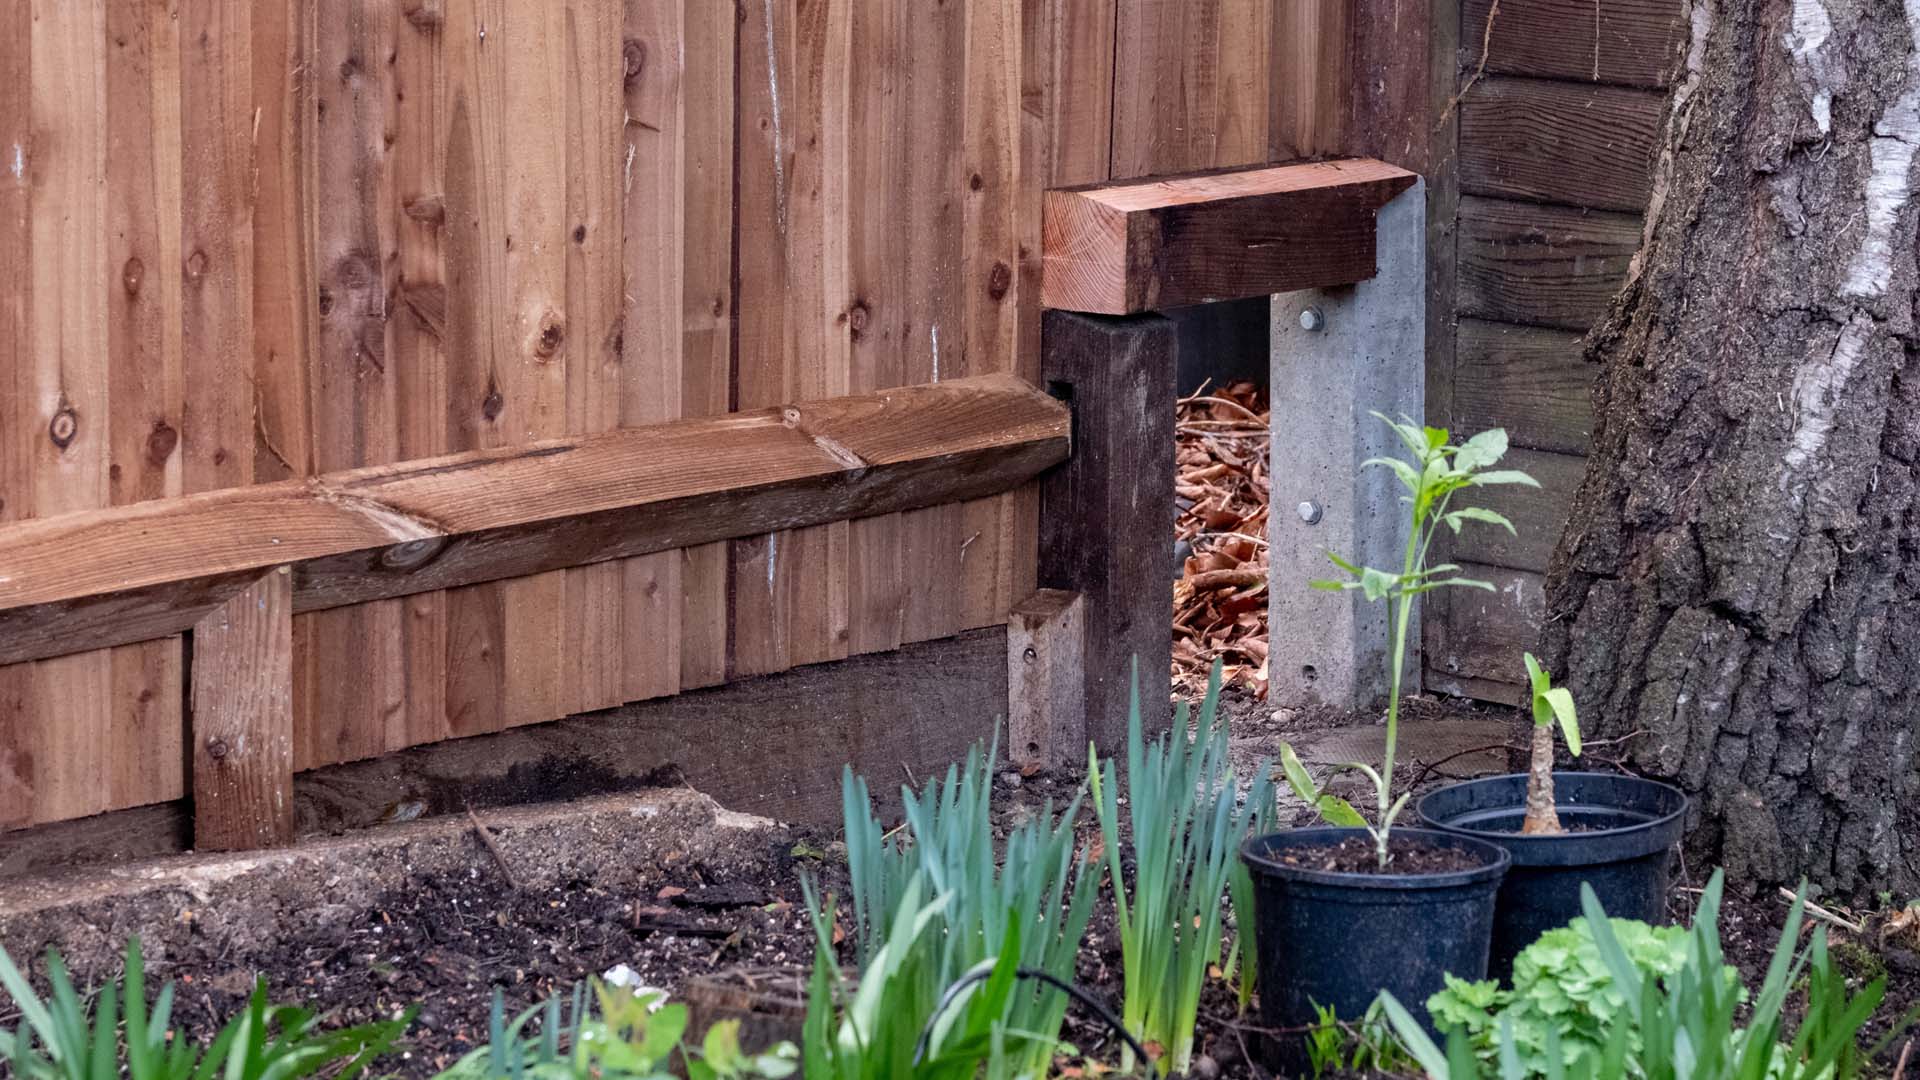 A hedgehog highway in an urban garden in London UK. The gap in the wooden fence is large enough to let wildlife, including hedgehogs and badgers, roam freely from garden to garden